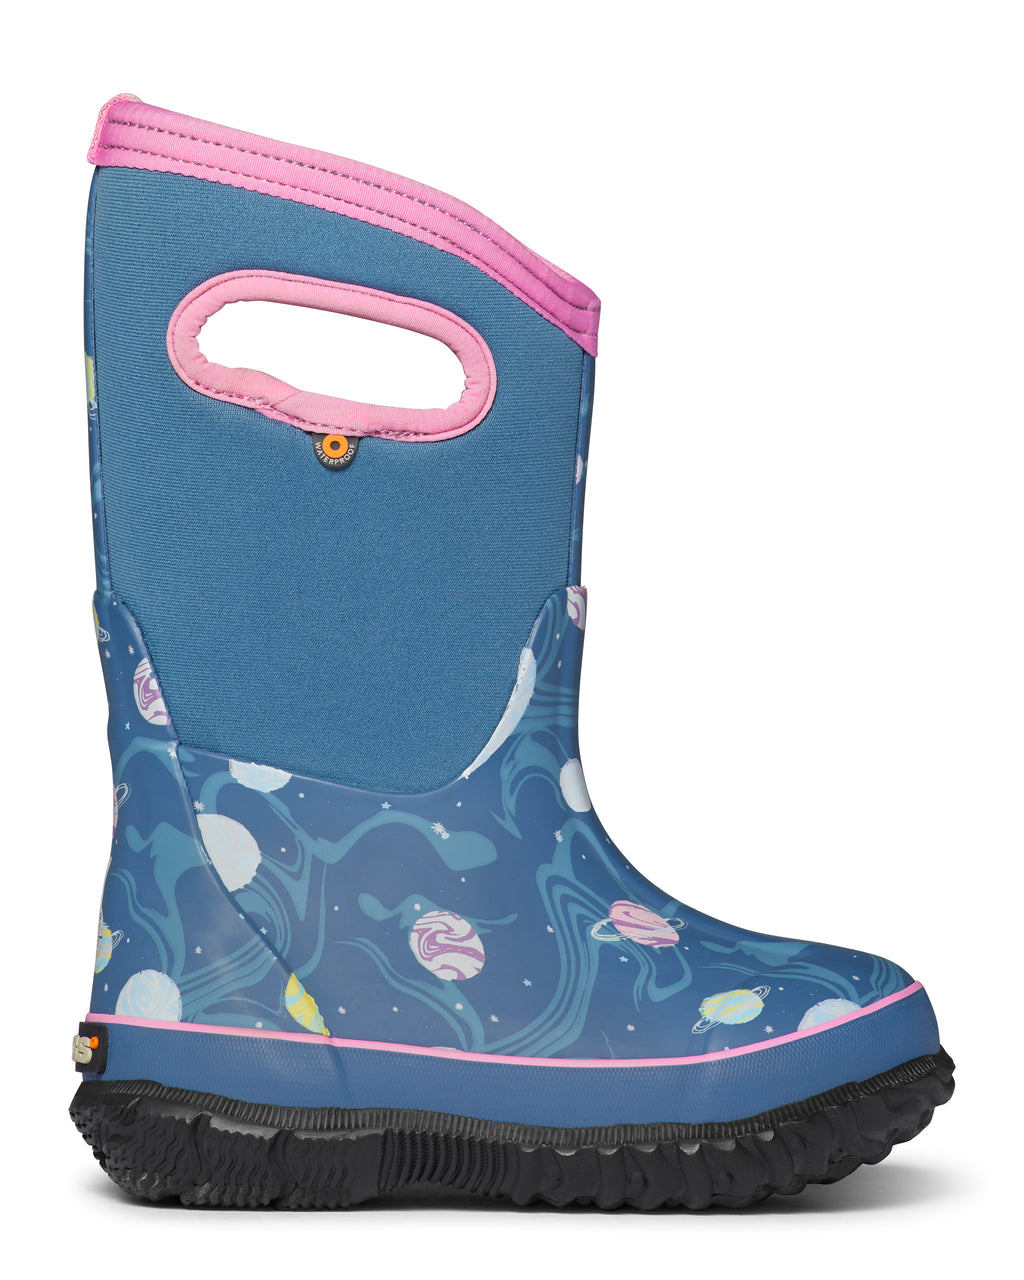 BOGS Girls' Classic Dark Blue Multi Planets Boots.You’ll never hear your kids complain about wet or cold feet with these Bogs Classic Boots.